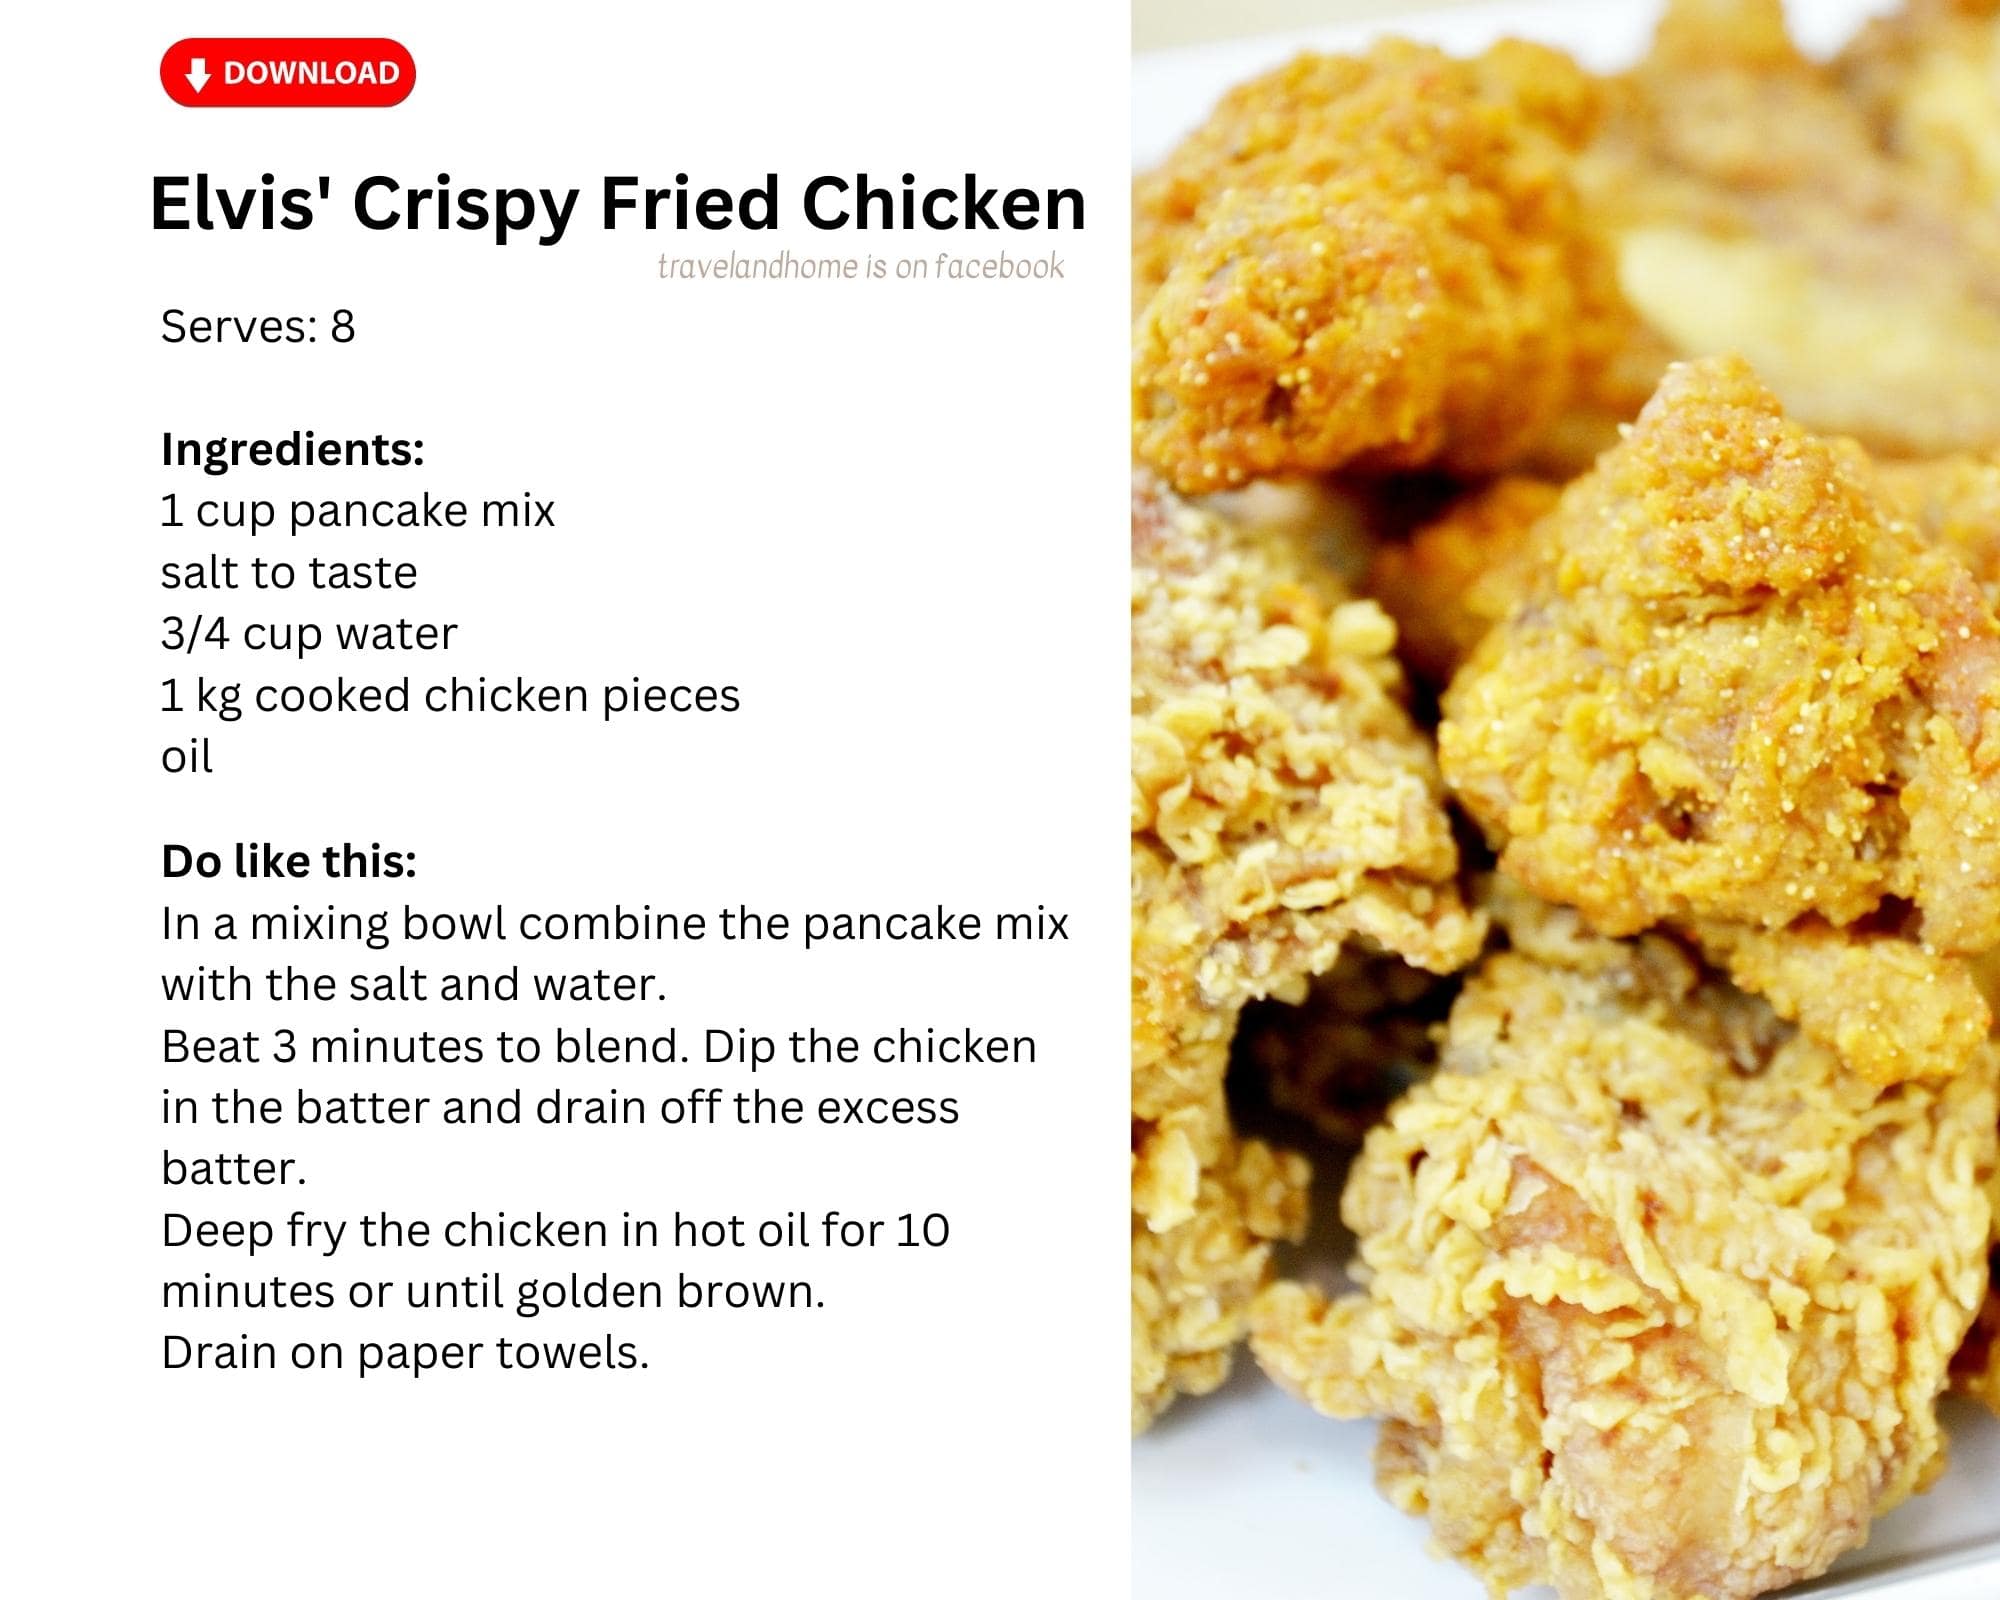 Quick and easy recipe for one Elvis favorite food crispy fried chicken min